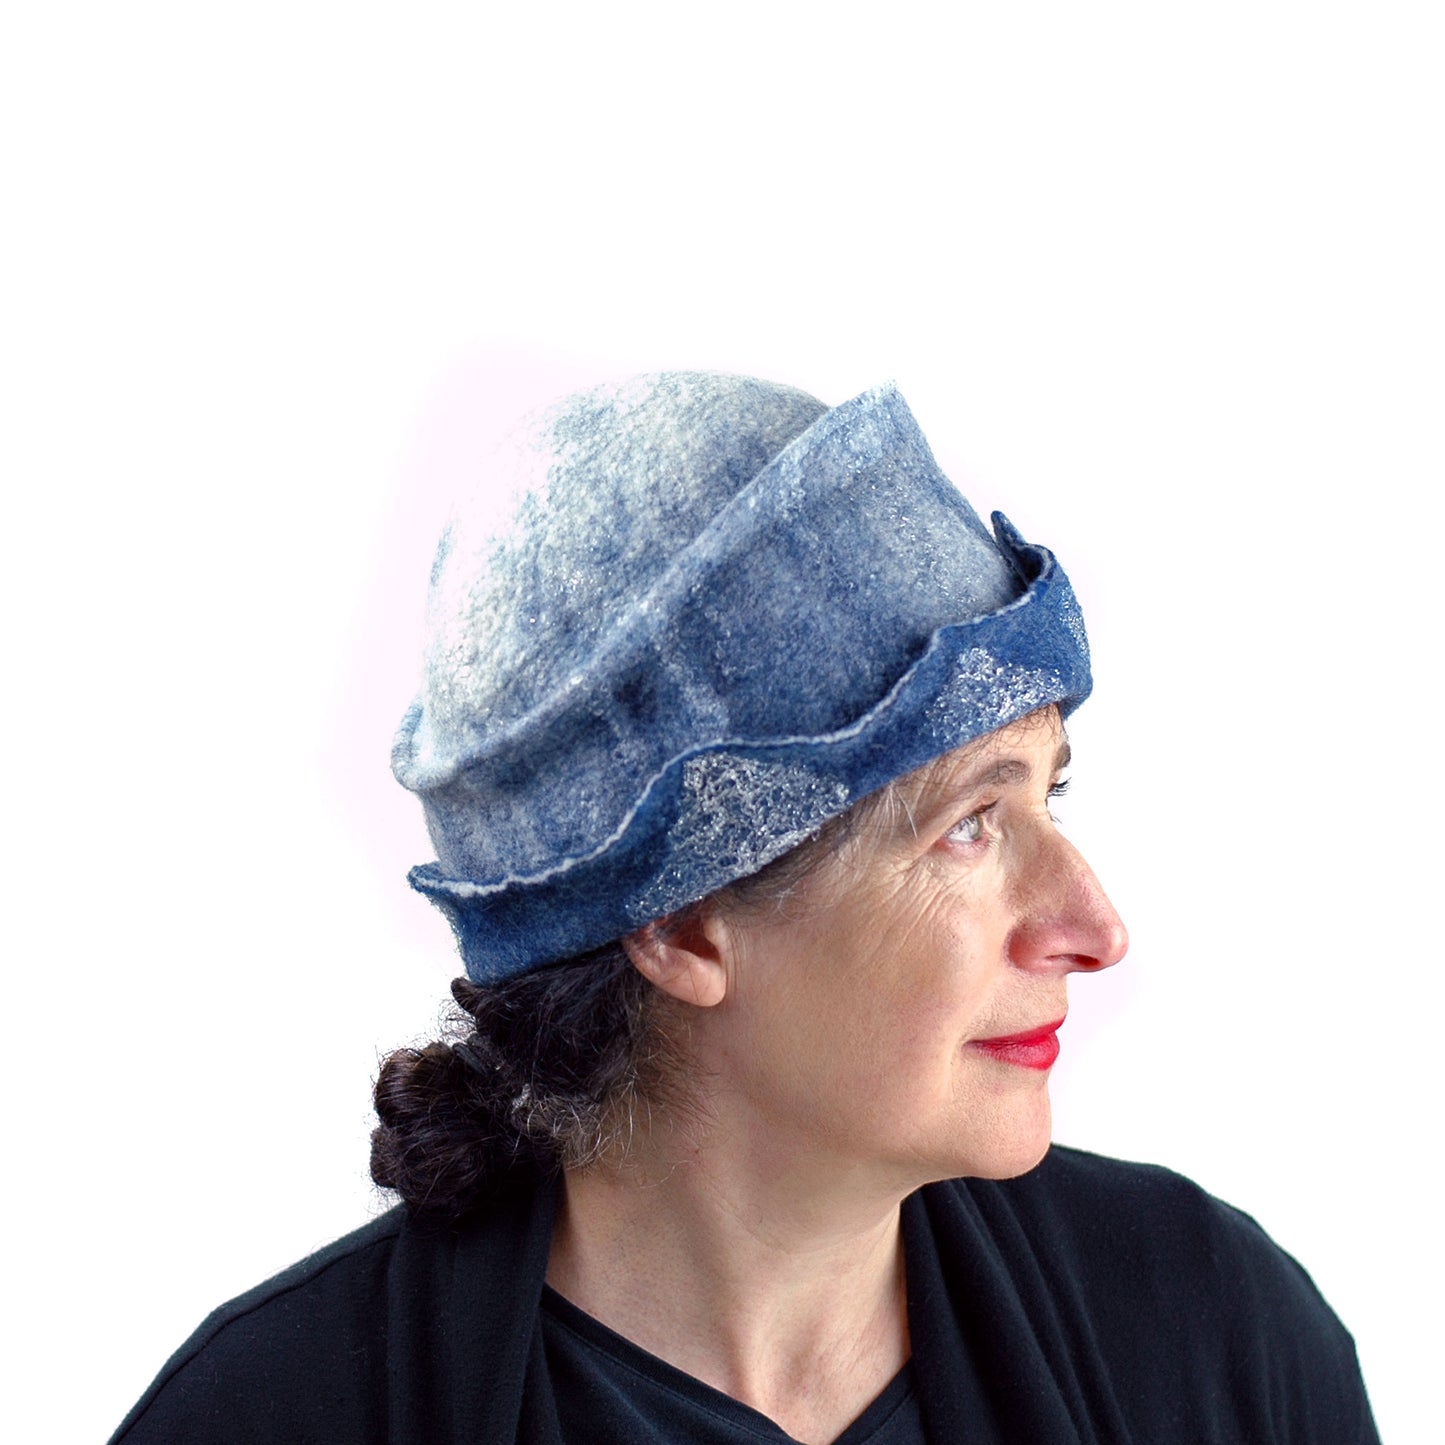 Indigo and White Felted Cloche Hat made with Superfine Merino Wool and Silver Lace - right side view